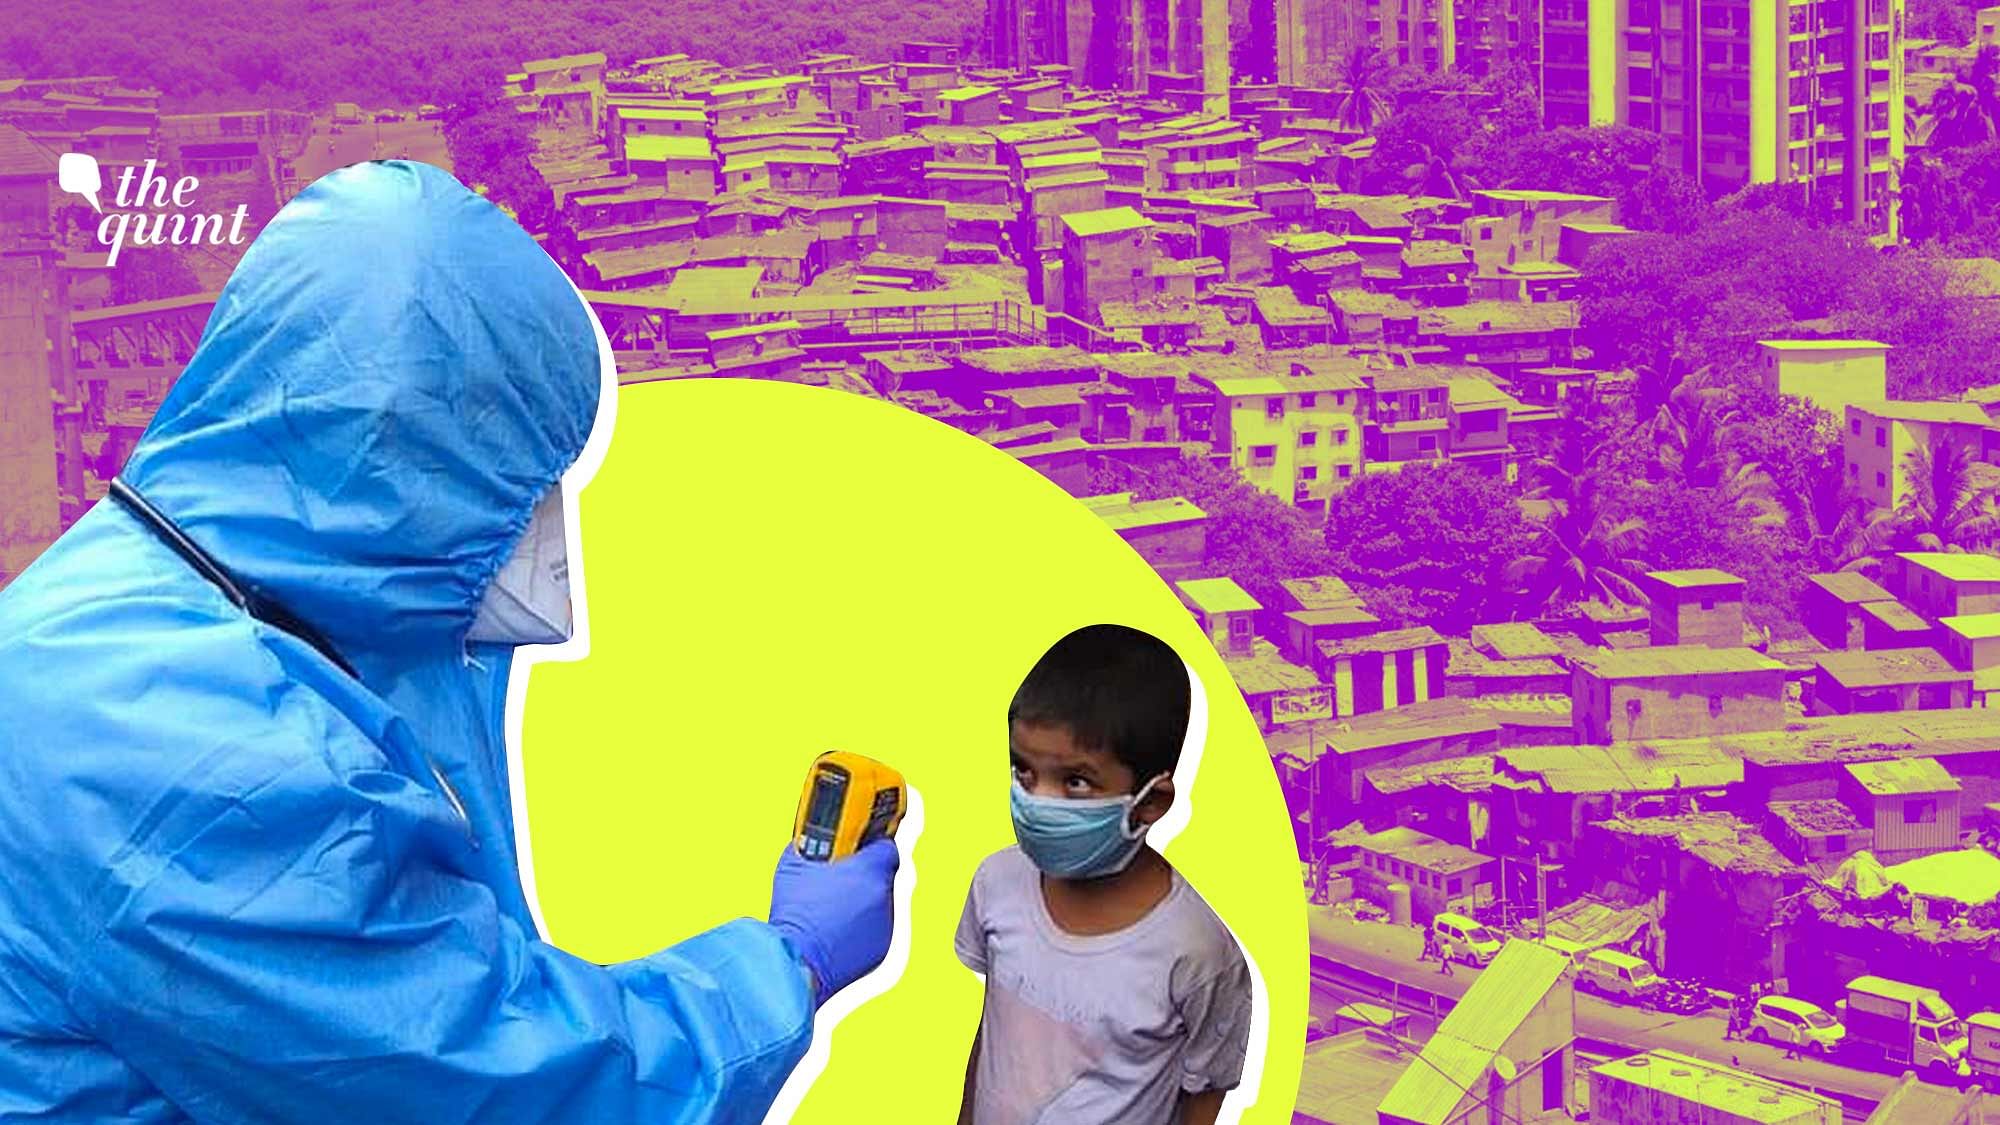 For the first time since the COVID-19 outbreak, no positive cases were reported in Mumbai’s Dharavi on Friday, 25 December.